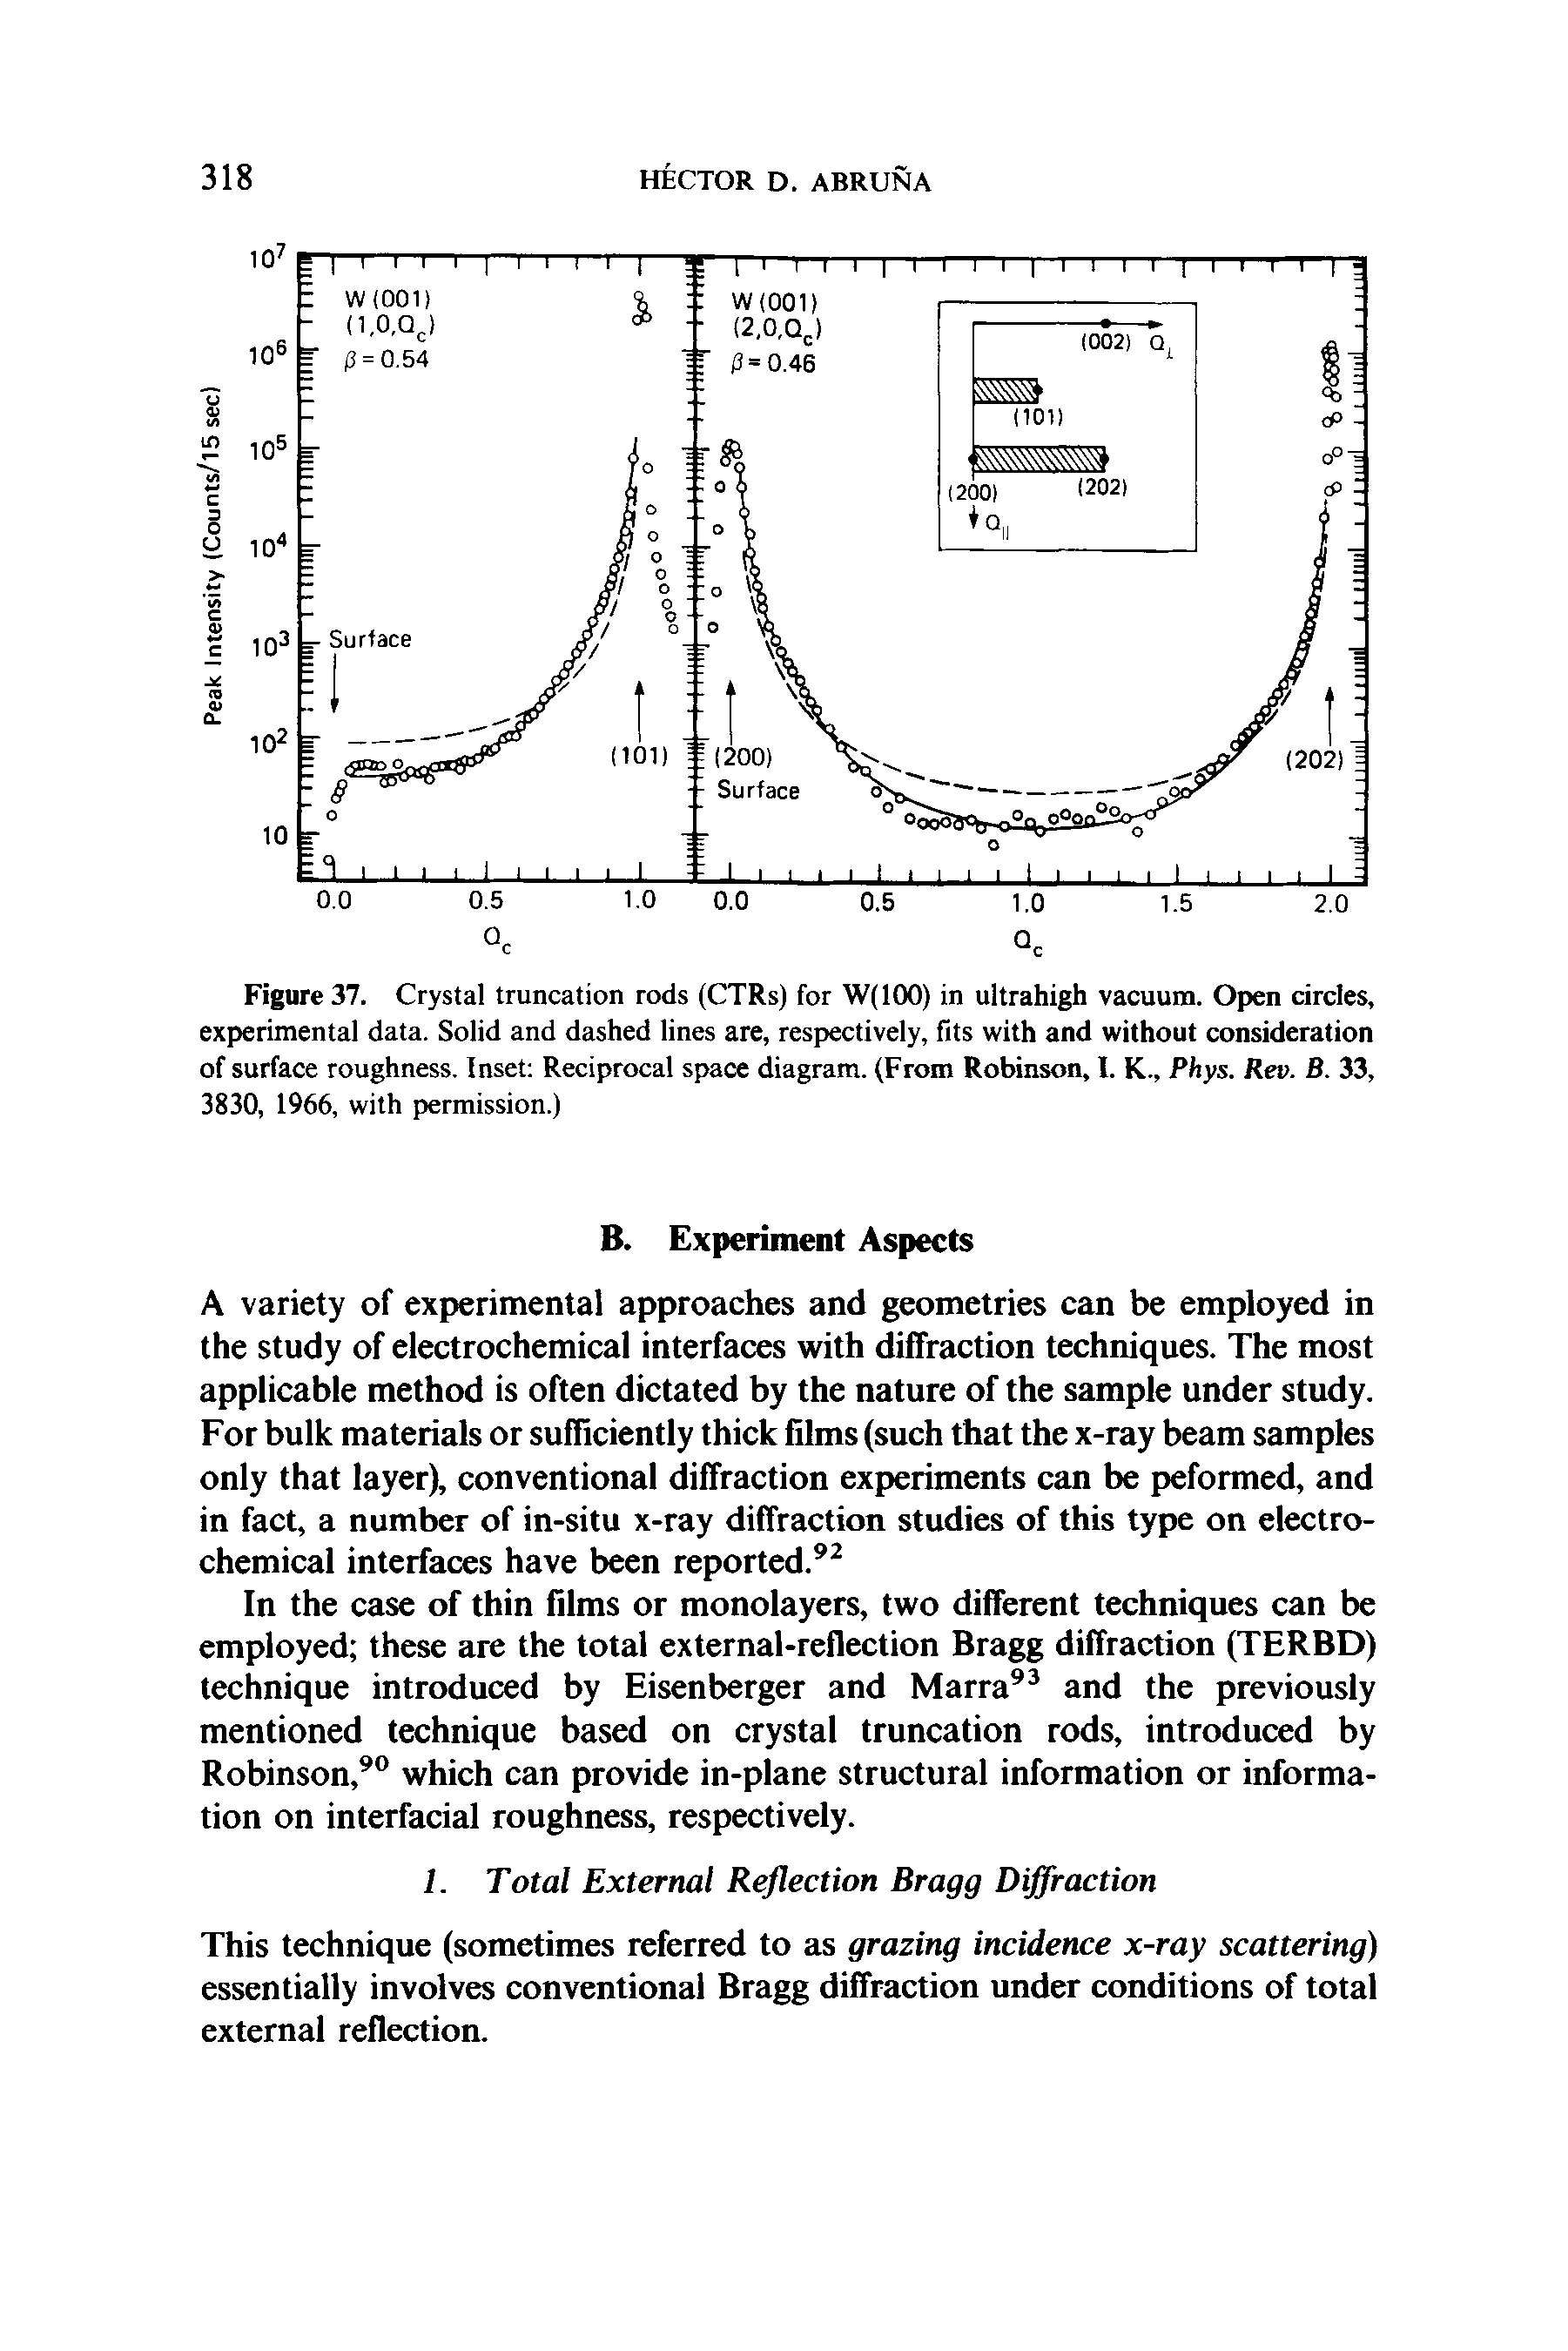 Figure 37. Crystal truncation rods (CTRs) for W(IOO) in ultrahigh vacuum. Open circles, experimental data. Solid and dashed lines are, respectively, fits with and without consideration of surface roughness. Inset Reciprocal space diagram. (From Robinson, I. K., Phys. Rev. B. 33, 3830, 1966, with permission.)...